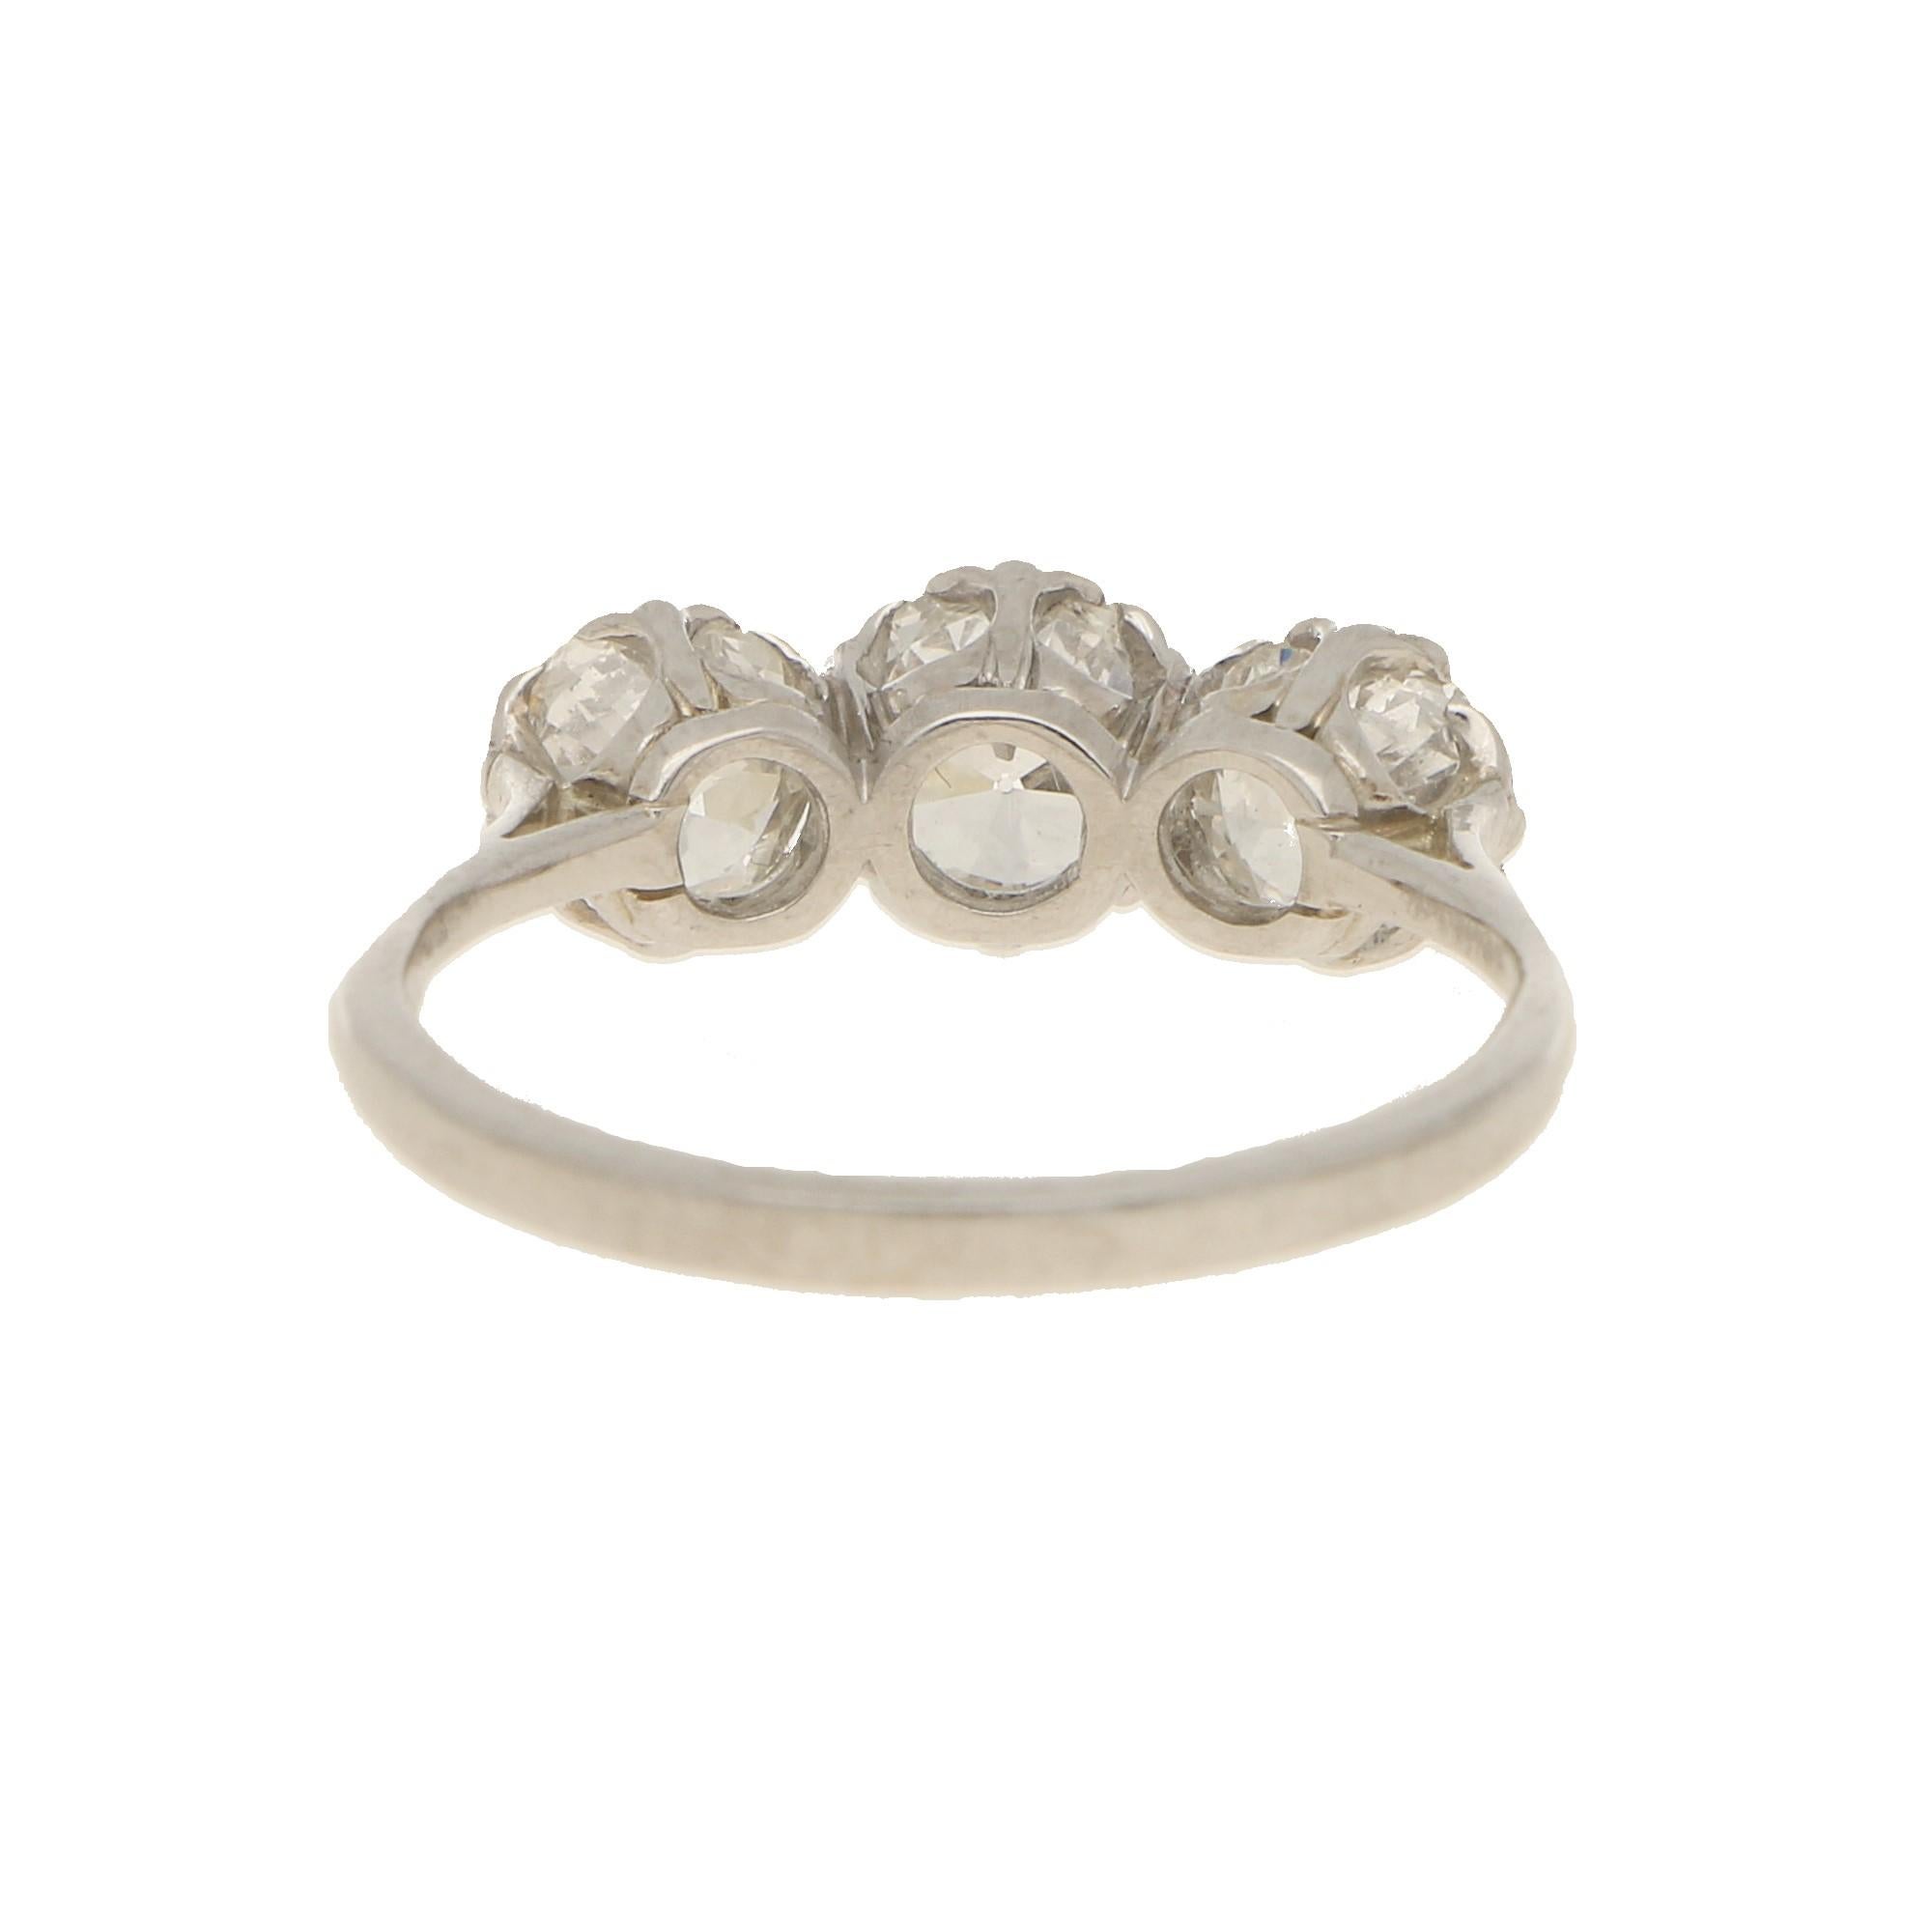 A beautifully crafted early 20th century diamond three stone ring set in platinum. The central old brilliant cut diamond is estimated to weigh 0.65 carats flanked by two old round brilliant cut diamonds weighing 0.50 carats each. All diamonds are